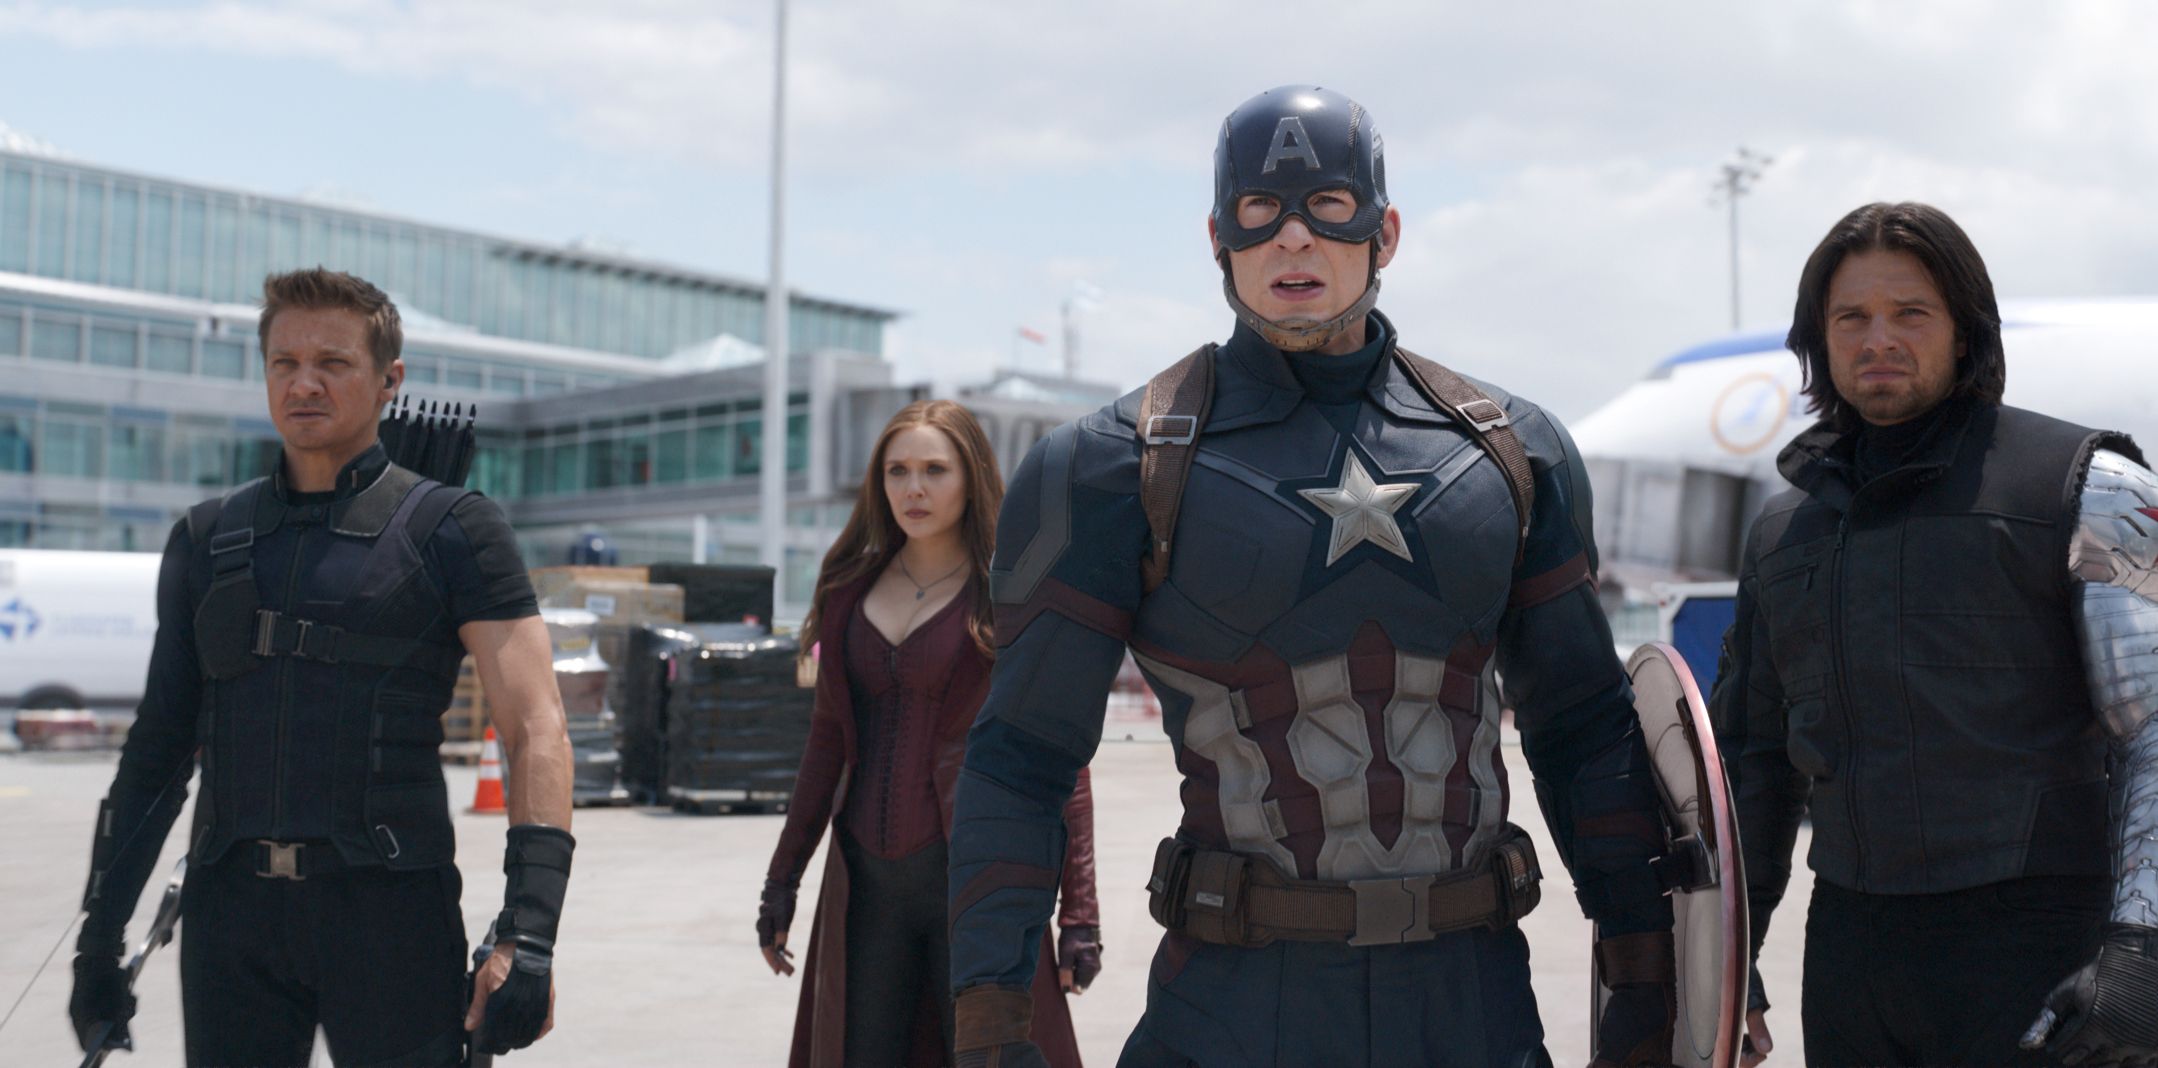 Hawkeye, Scarlet Witch, Captain America, and Winter Soldier stand together to prepare to fight in Captain America: Civil War